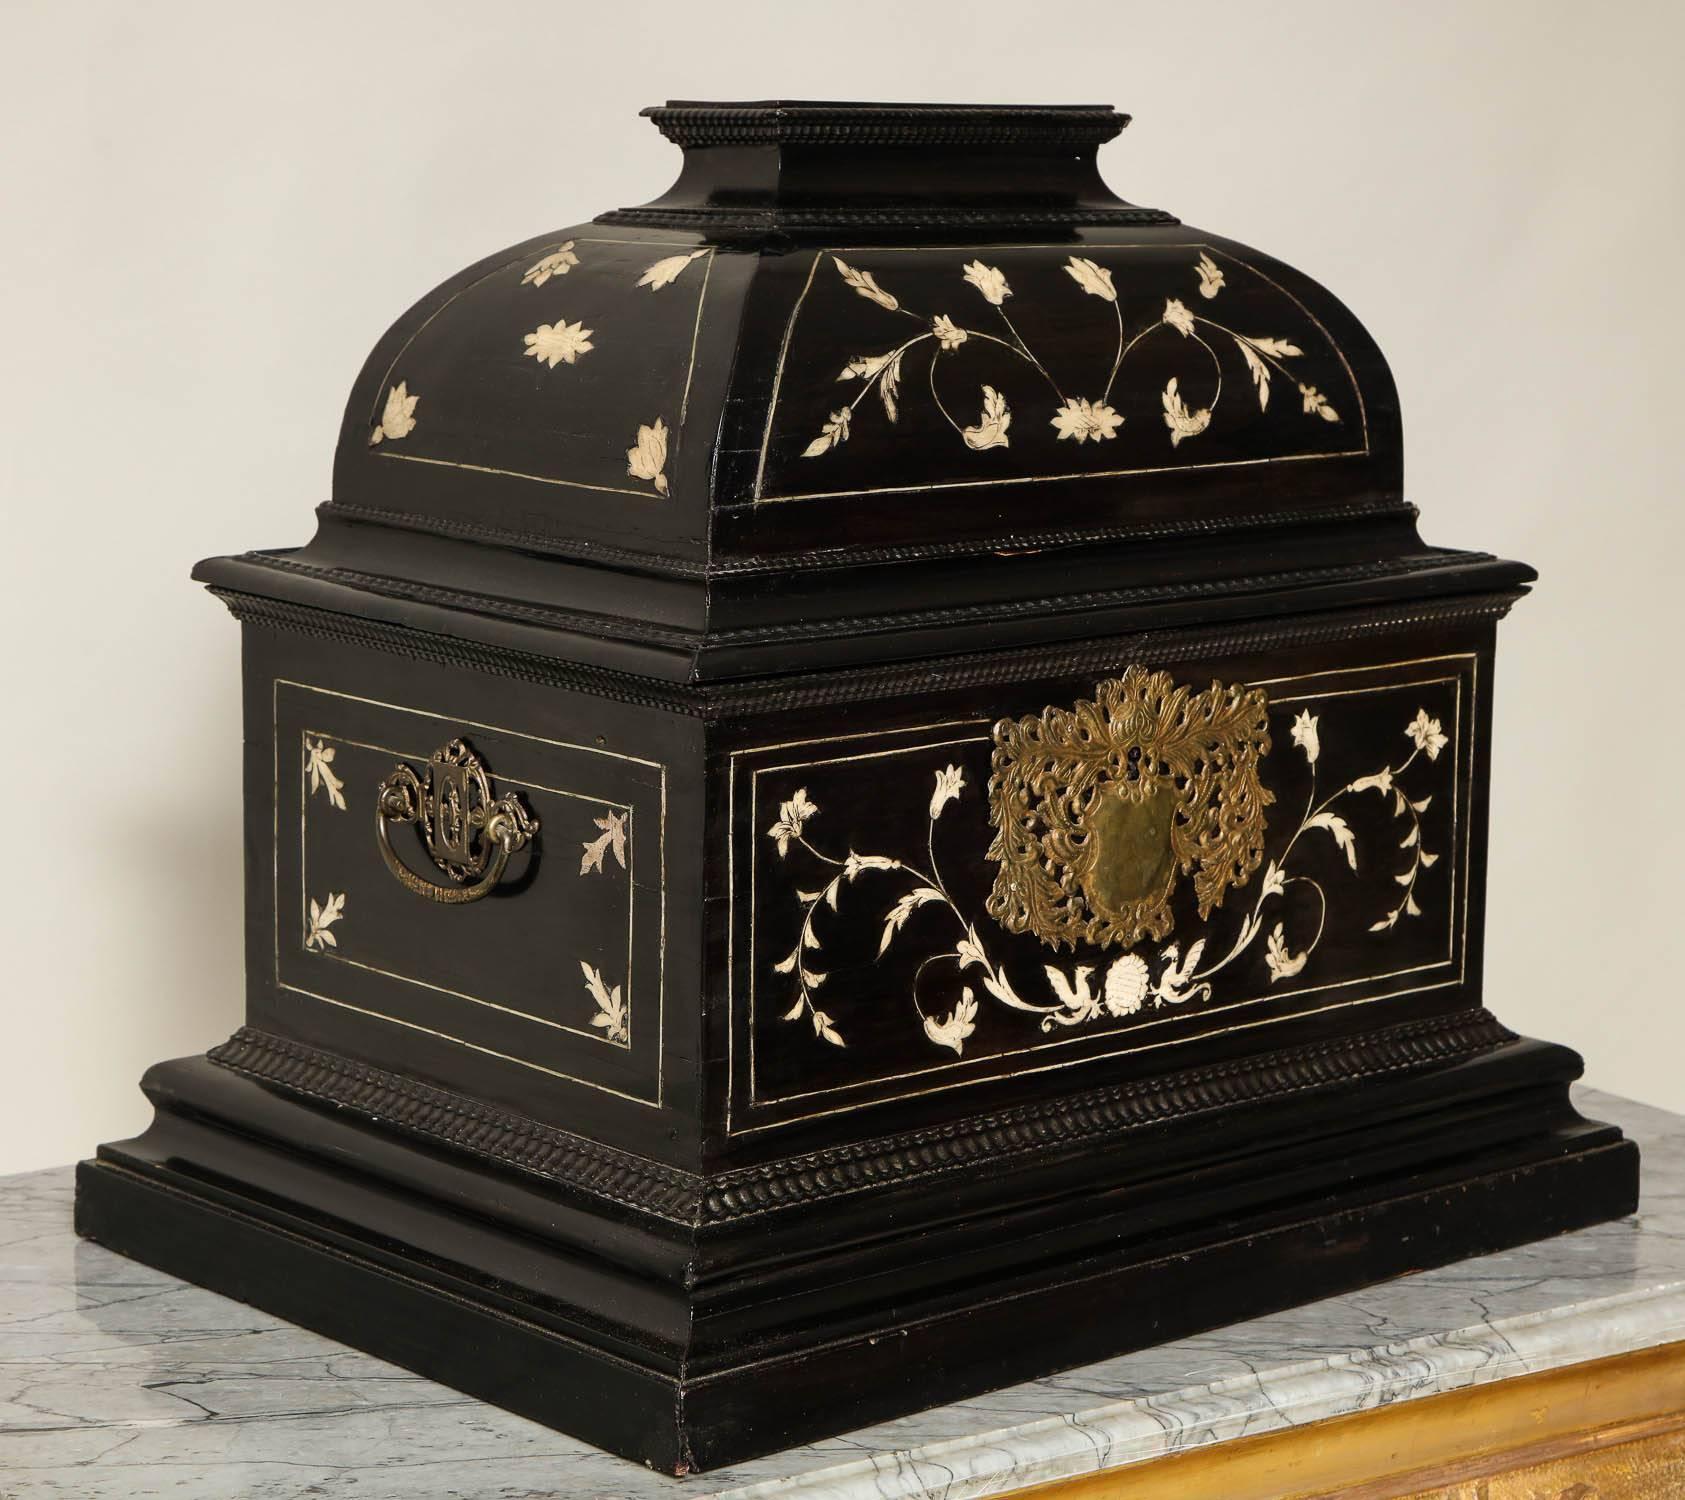 Very fine Baroque period Flemish bone inlaid ebony valuables chest, the domed lid with floral inlay and ripple molding, over gilt brass pierced escutcheon and handles, the front and sides also with floral bone inlay over stepped molded base, the